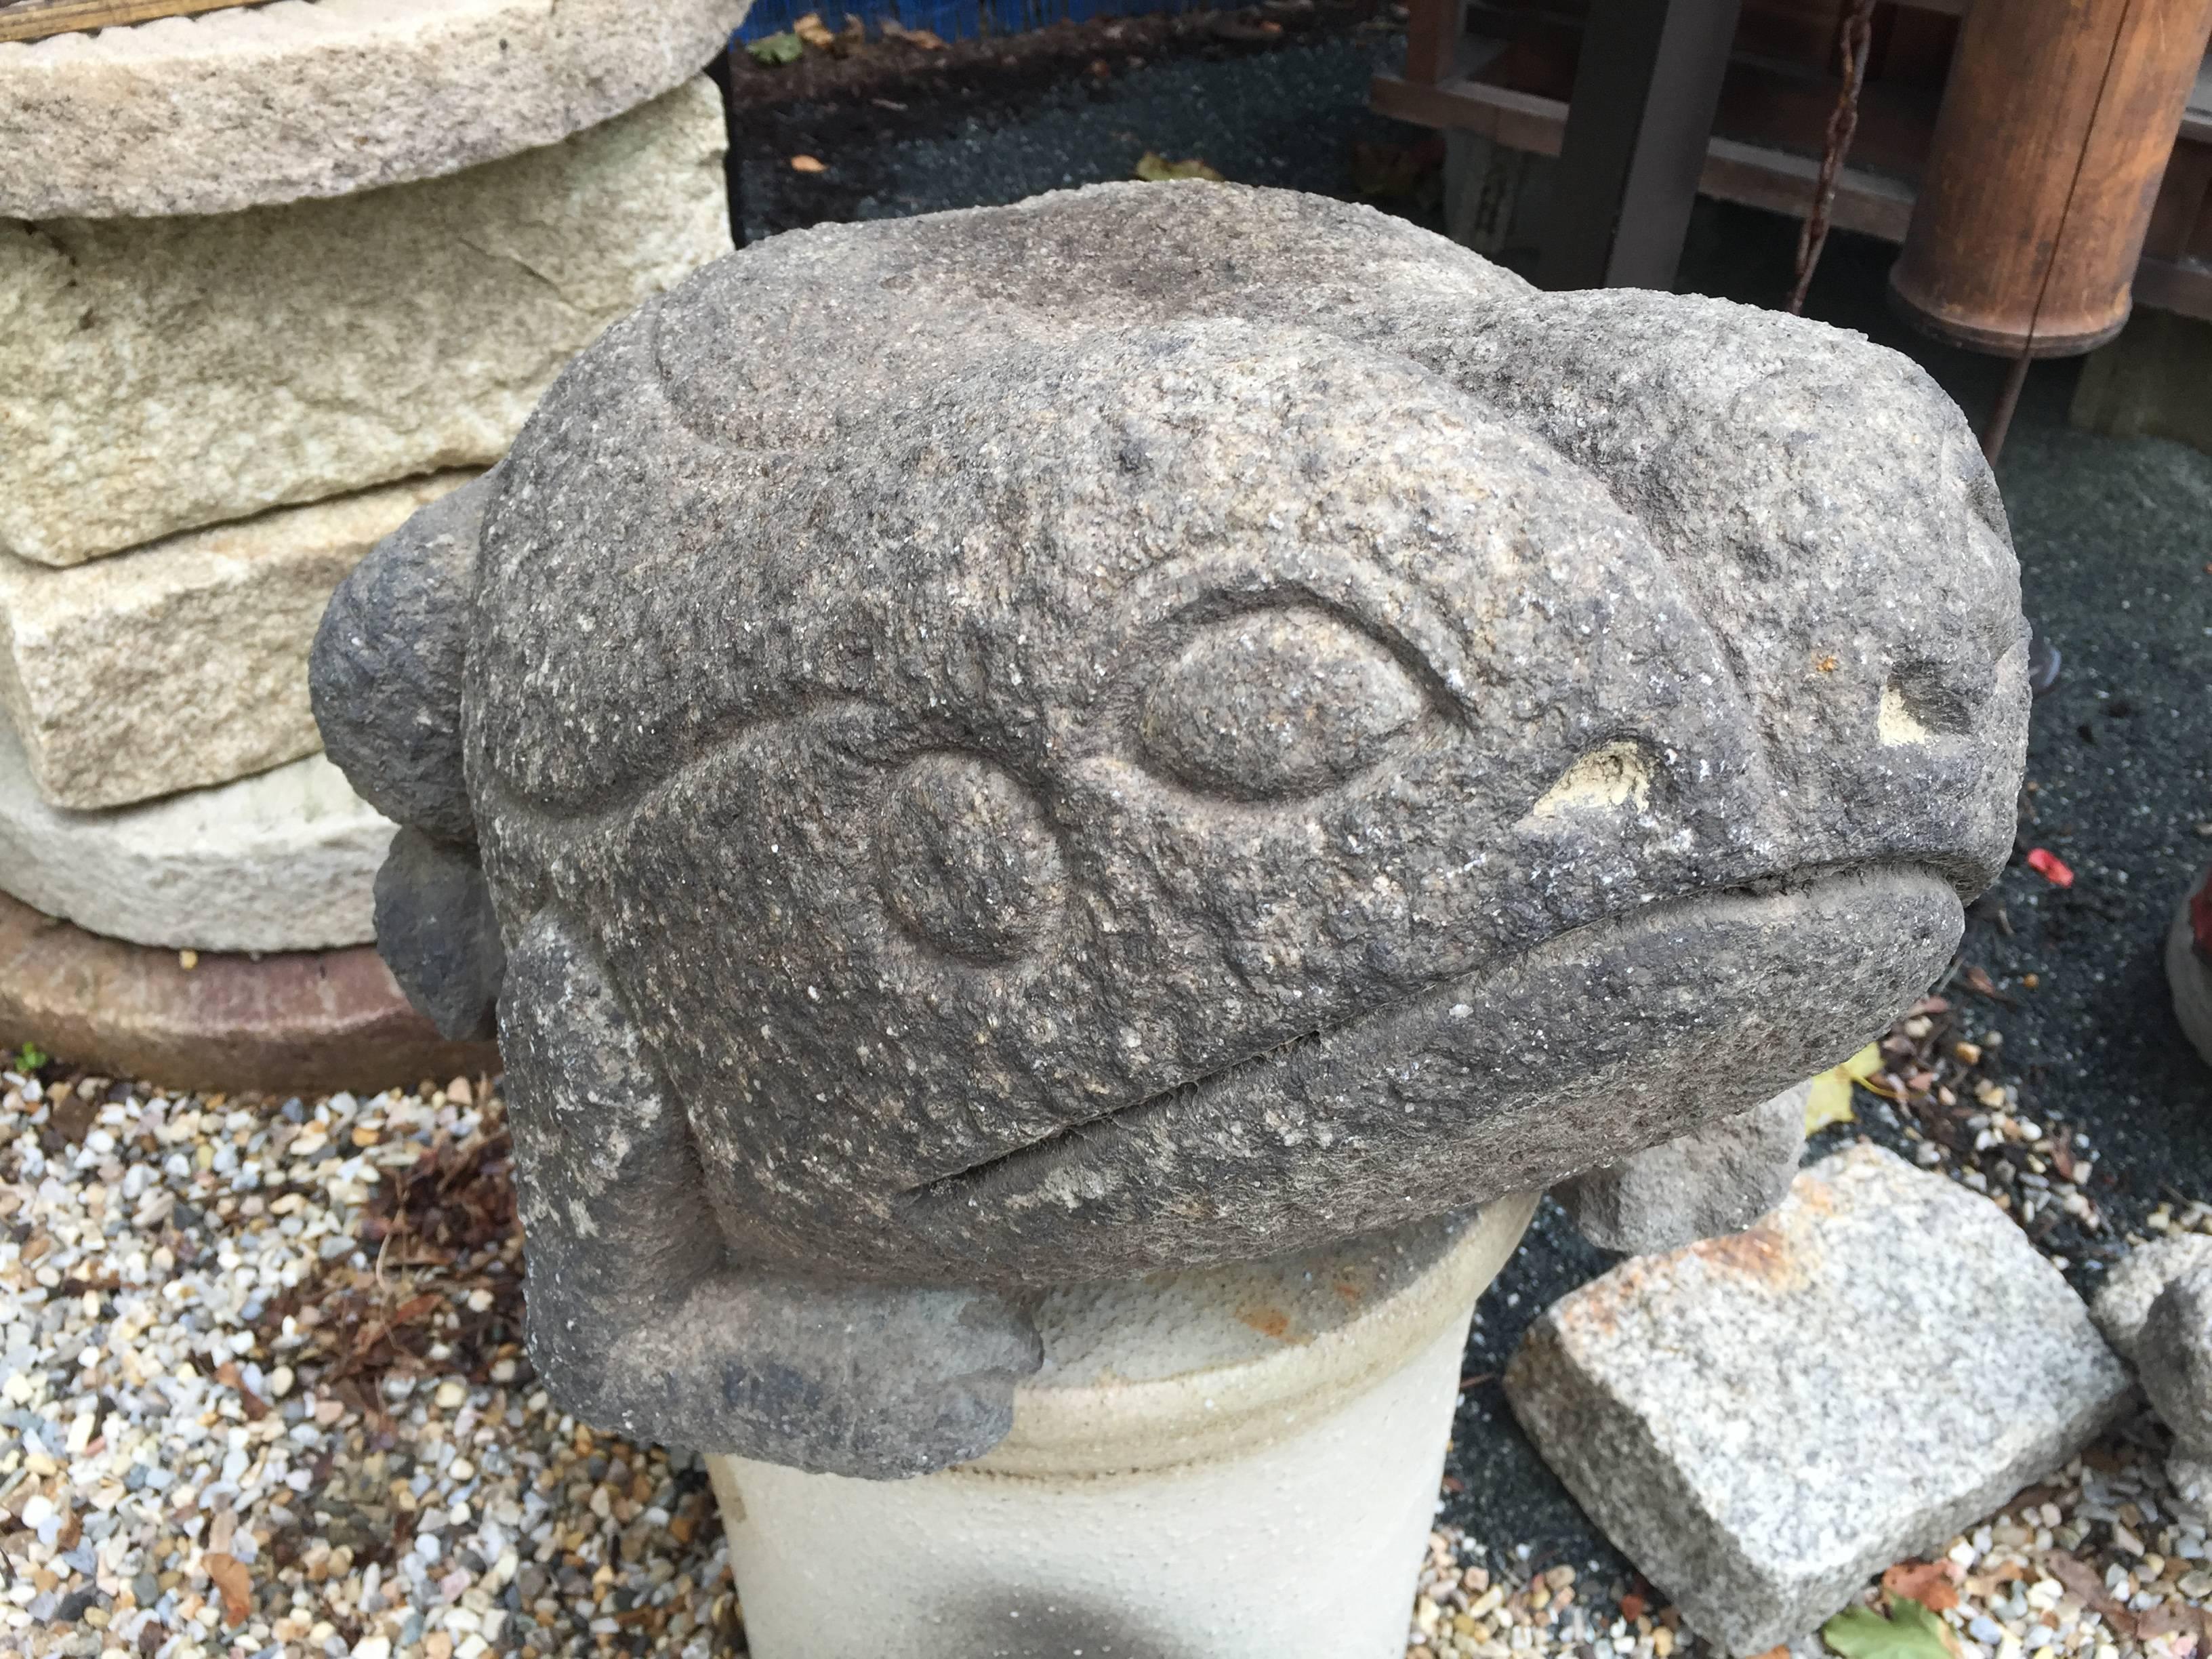 A delightful opportunity to acquire a rare and Giant Japanese hand-carved stone frog sculpture fresh from an old Shga Japan garden and dating to the early 20th century. Look at the superb carving detail on his surfaces - a master work of a seasoned